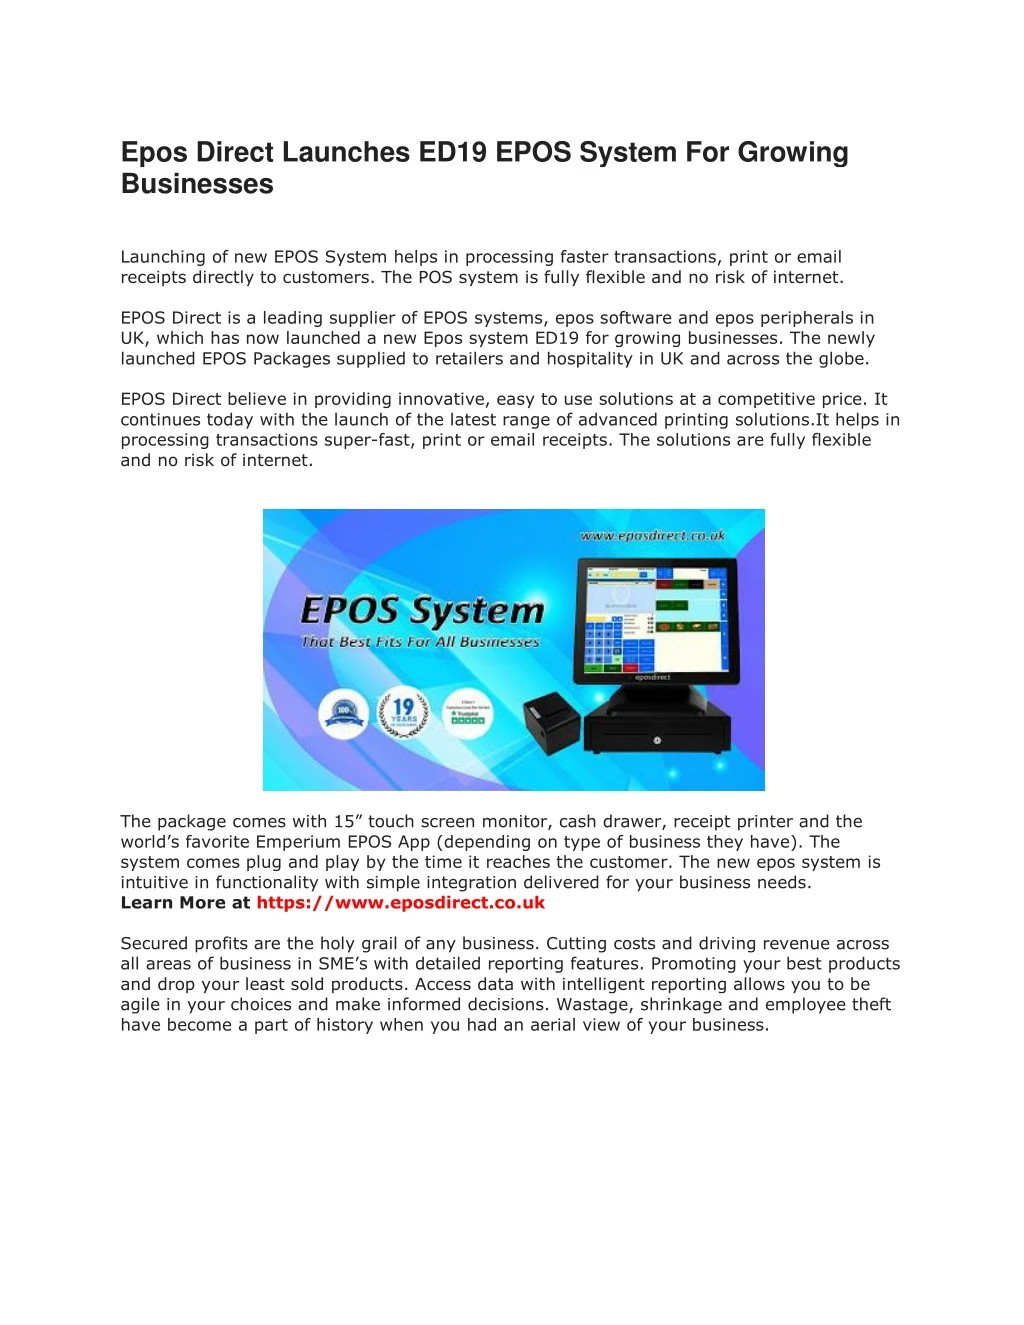 epos direct launches ed19 epos system for growing